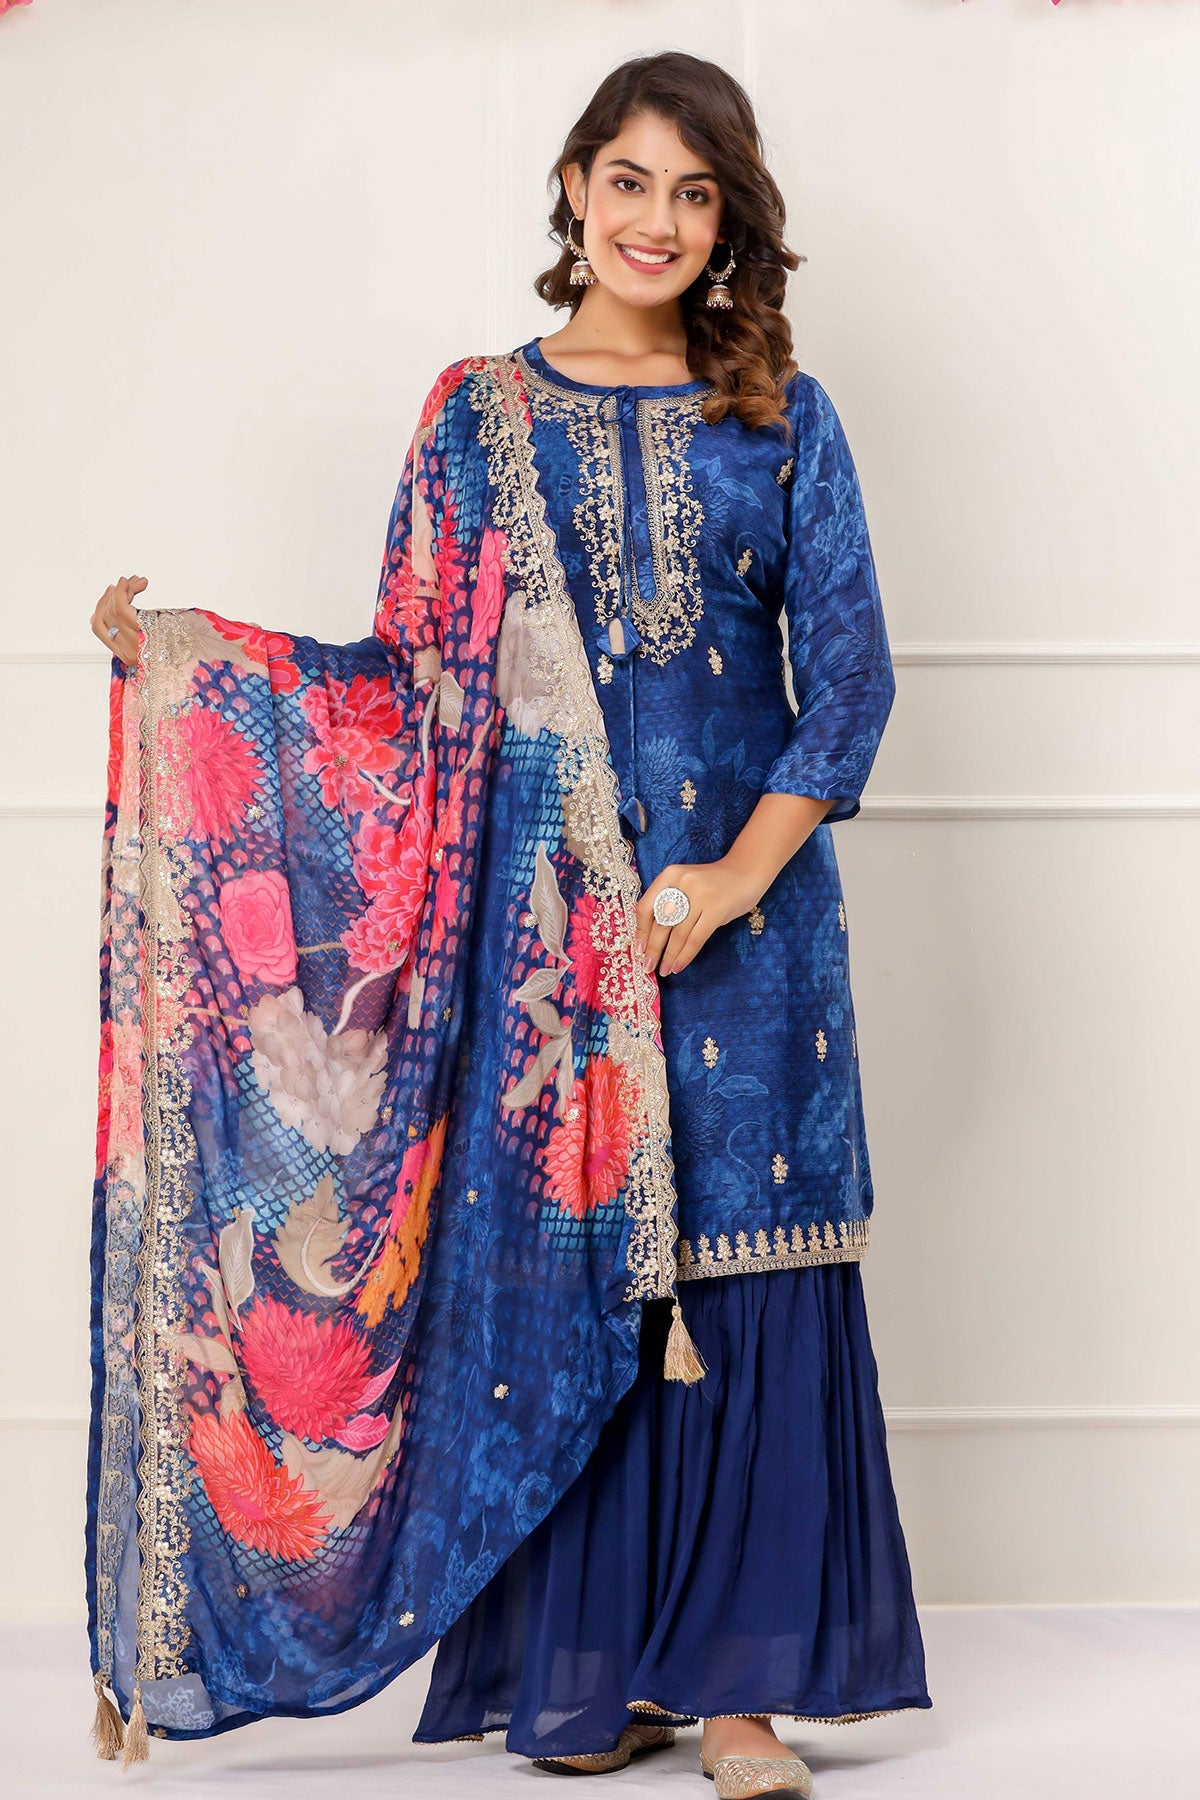 Royal Blue Chanderi Floral Printed Zari Embroidered Suits